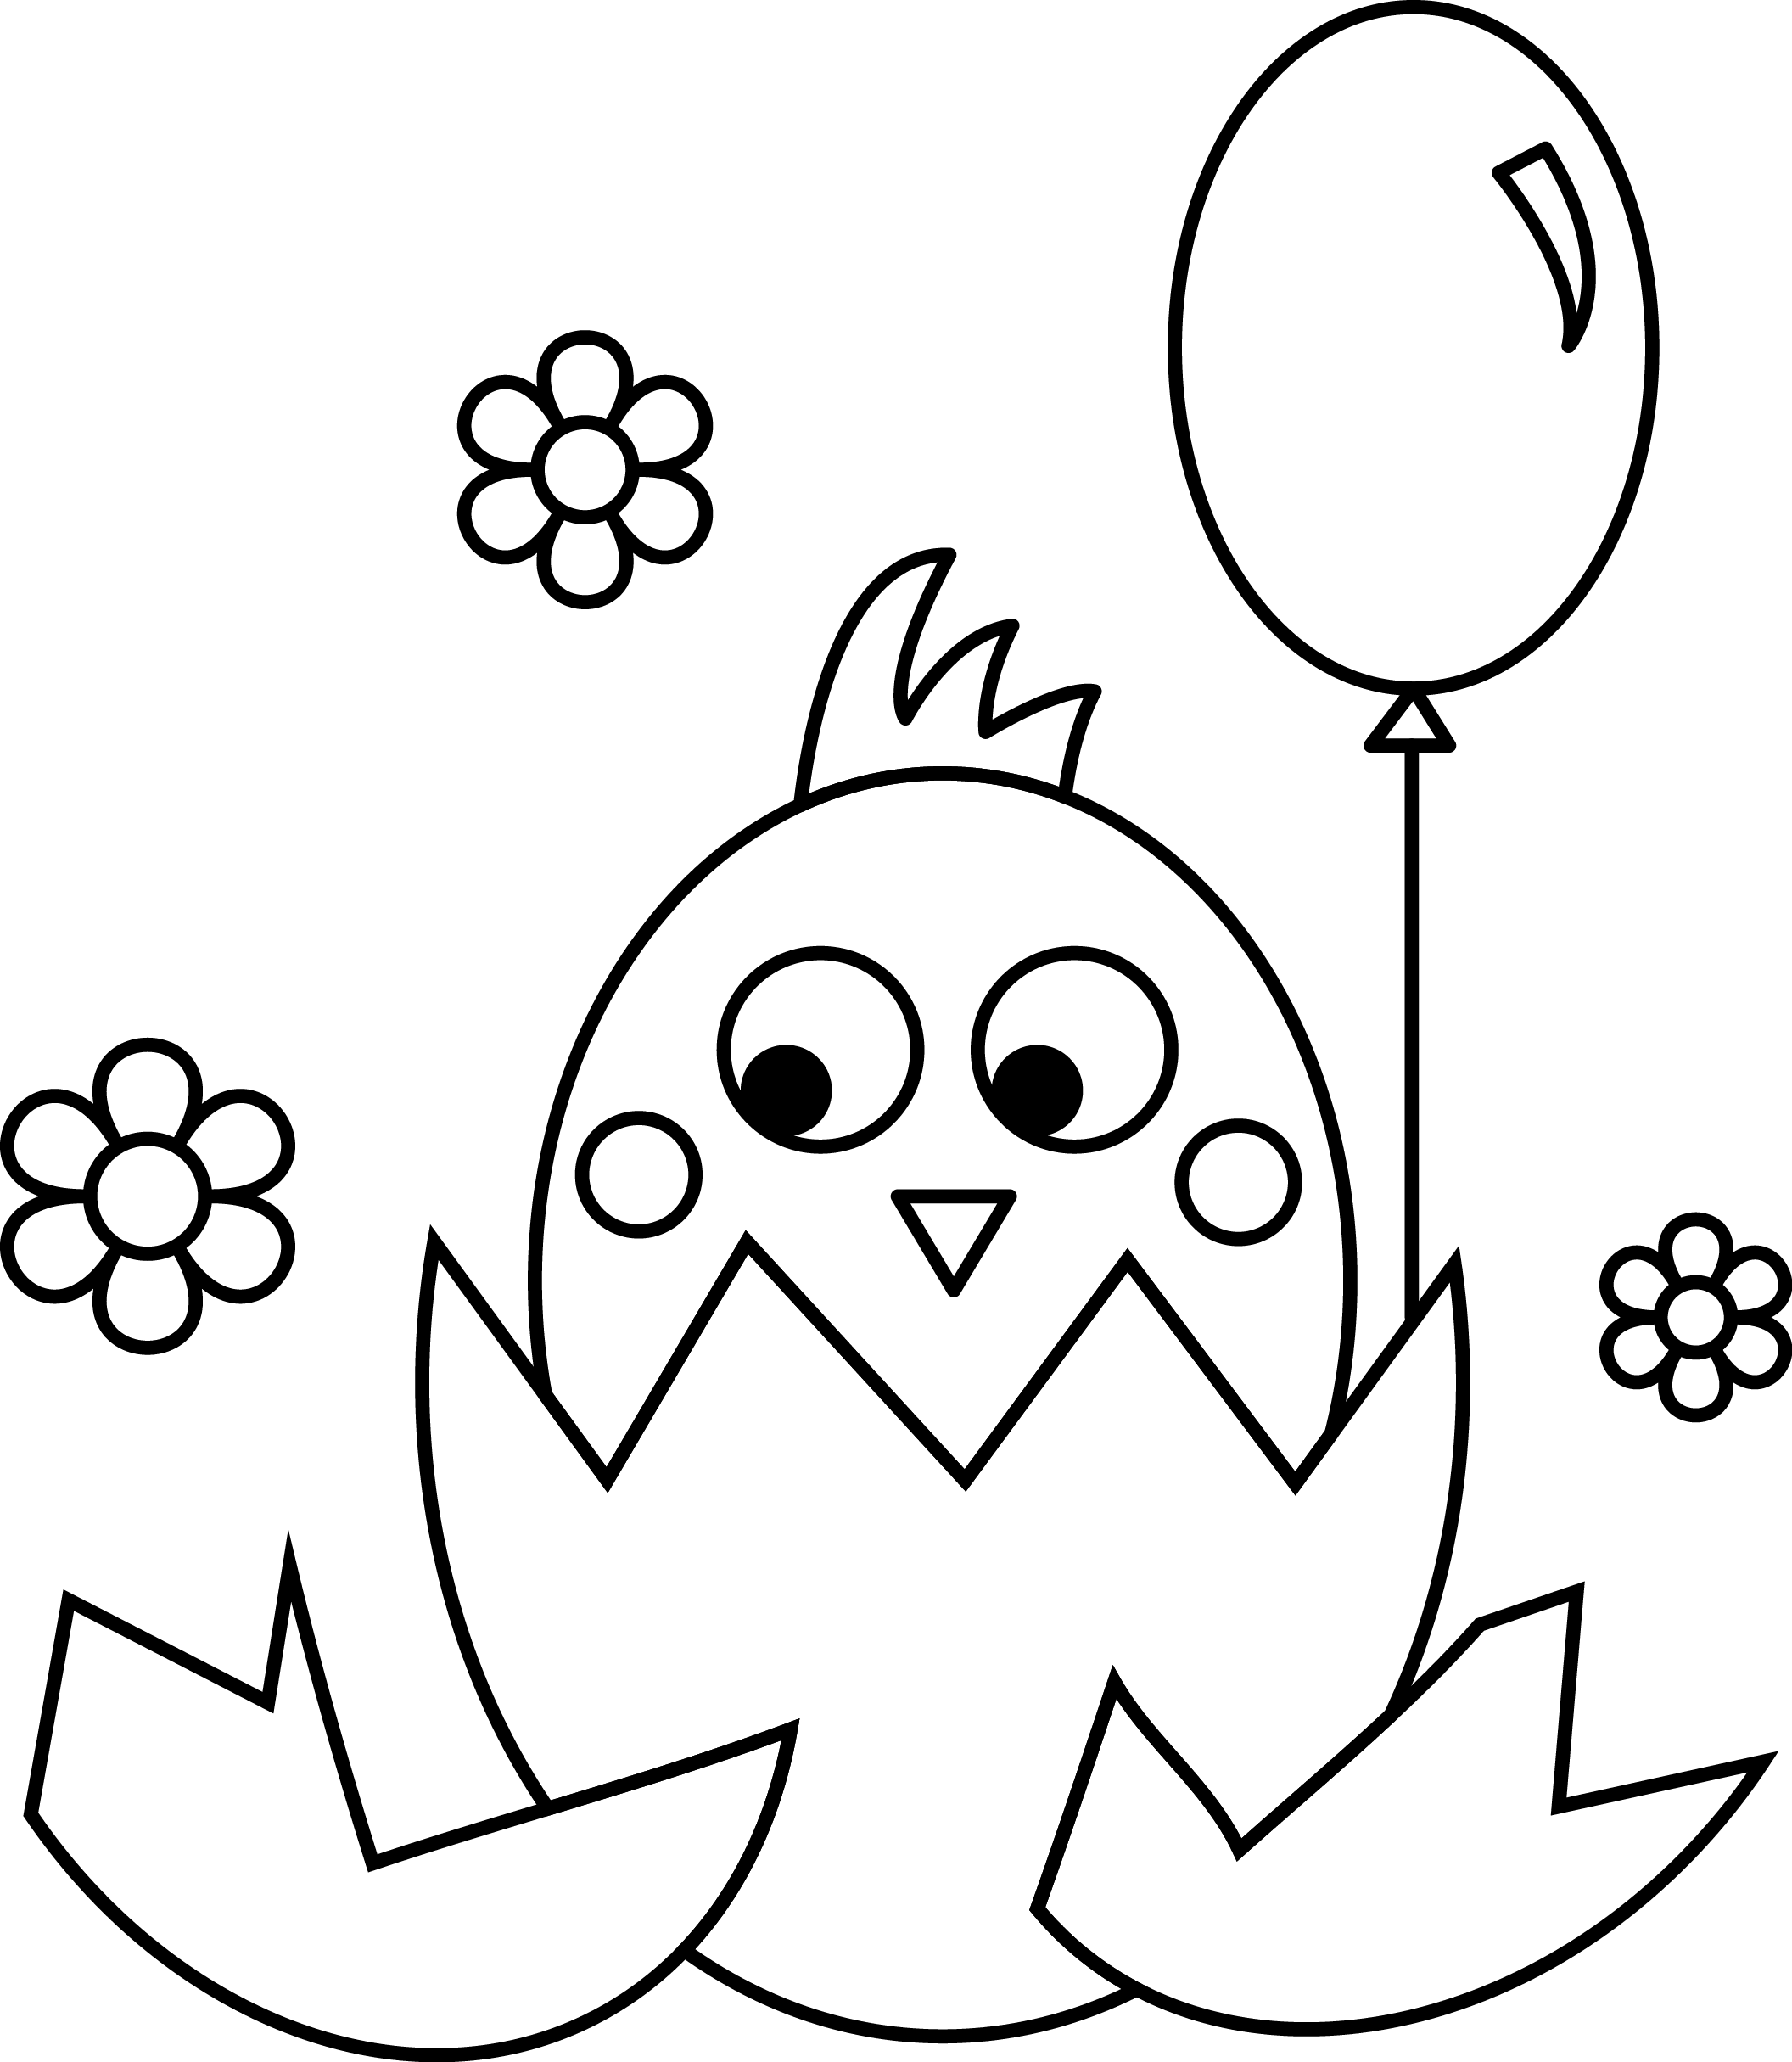 Chick Feet Coloring Page - Coloring Pages For All Ages